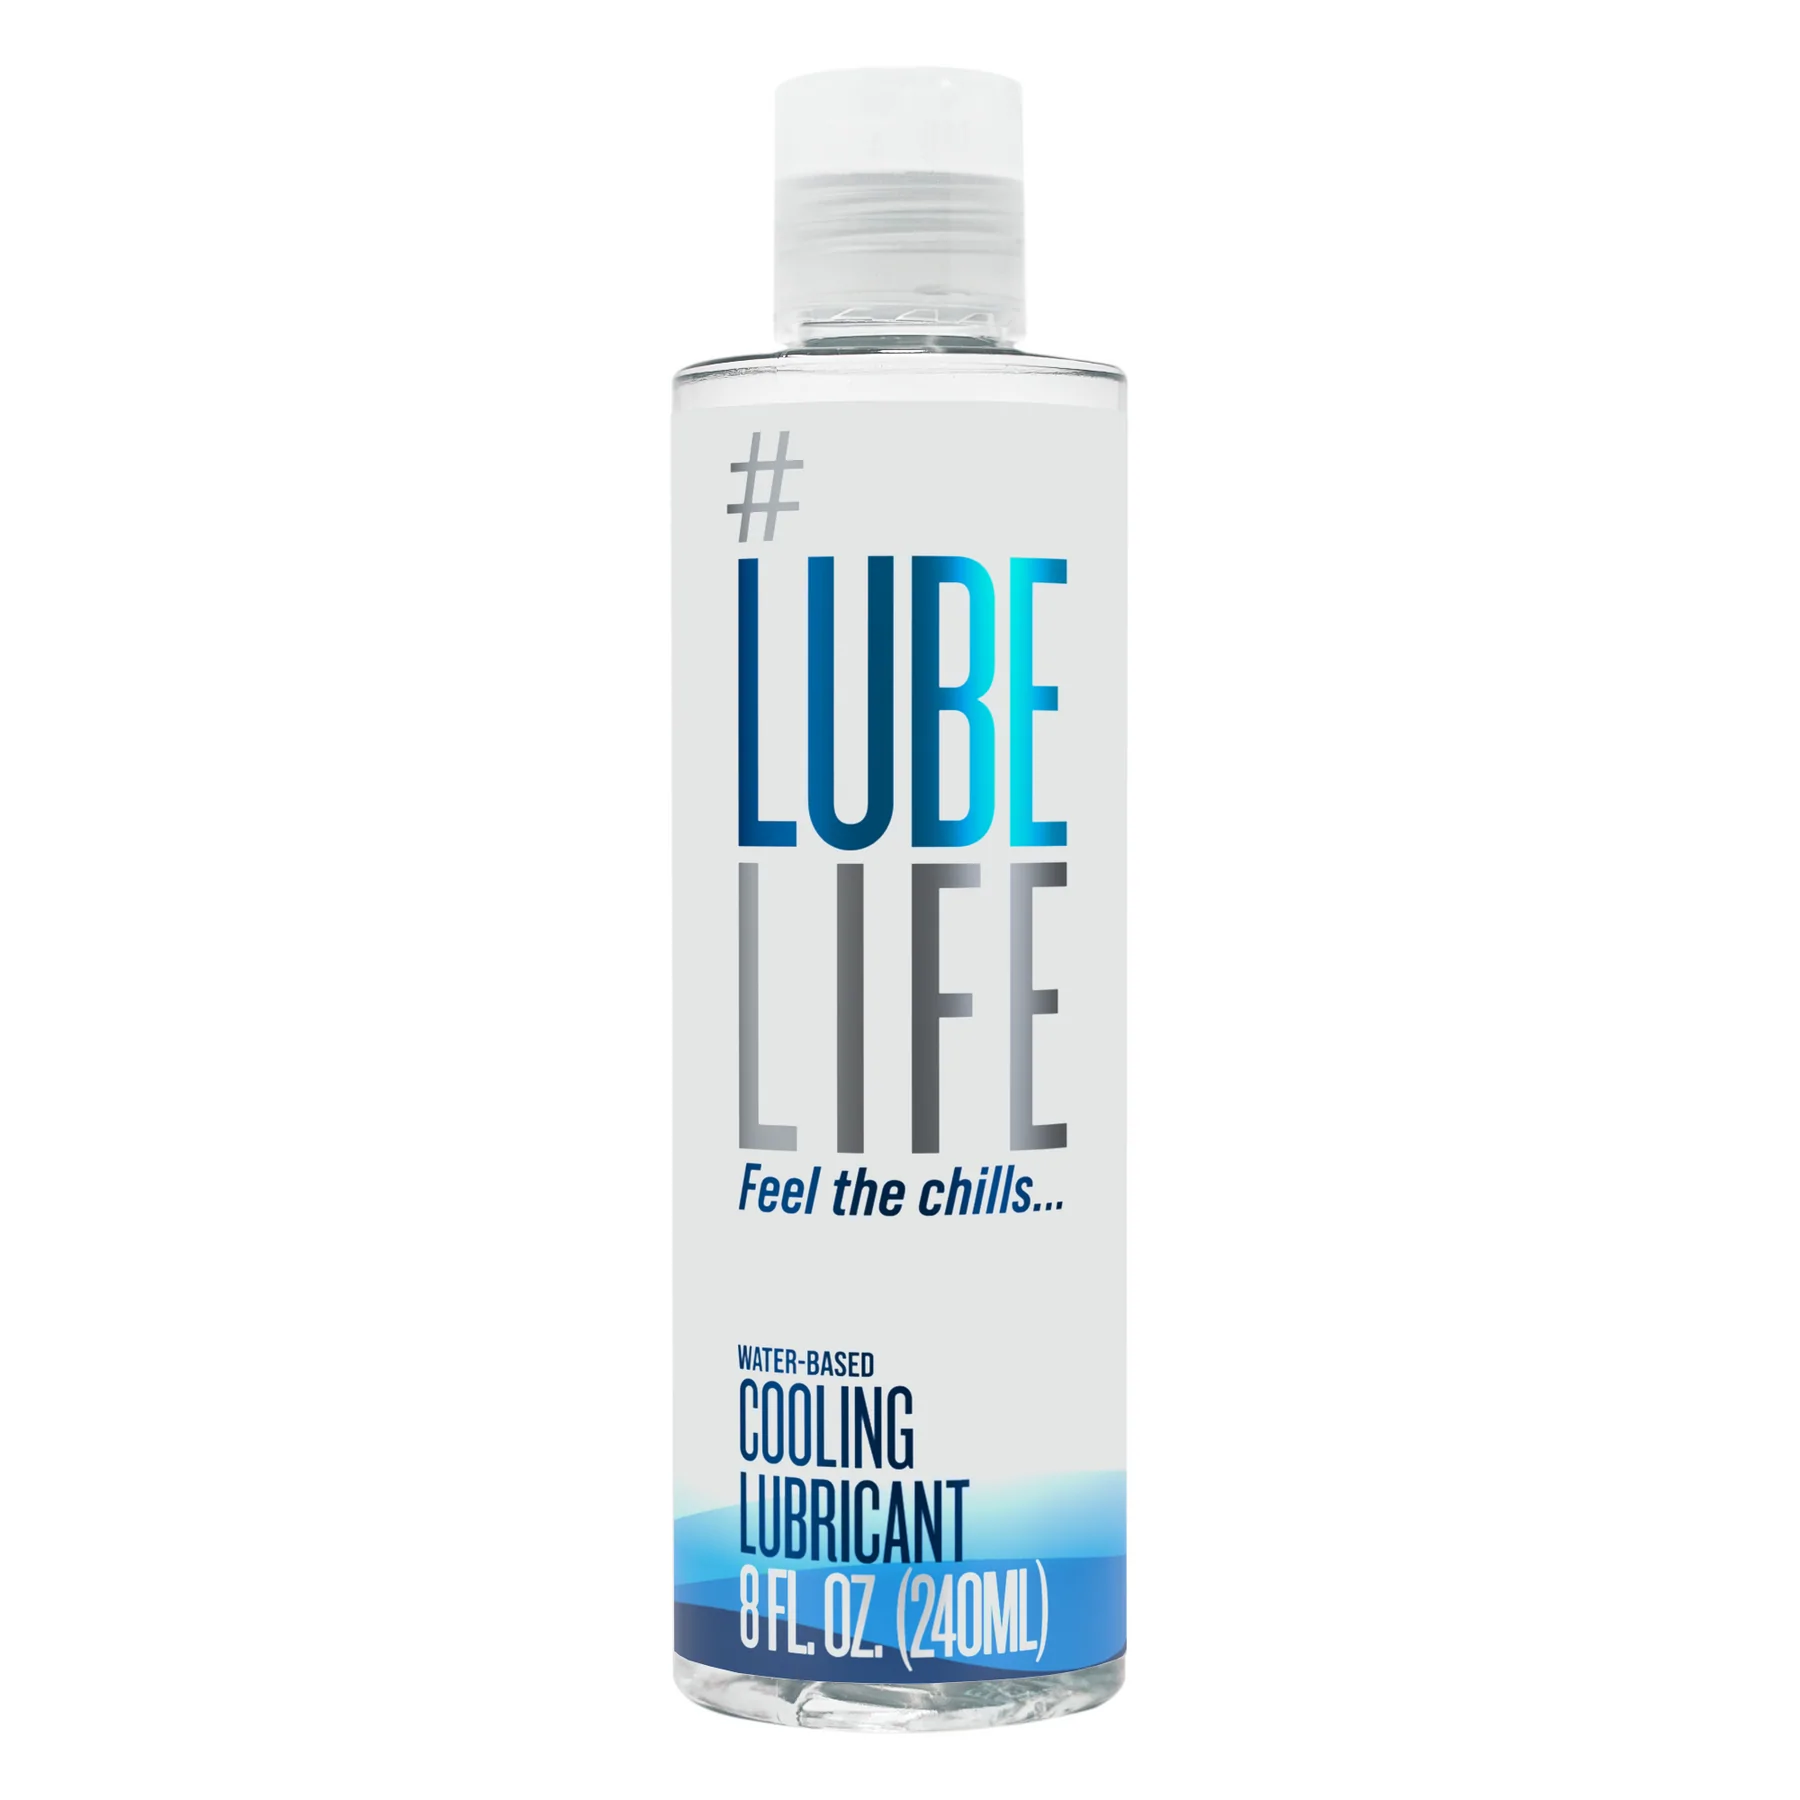 LubeLife + Limited Edition Water-Based Birthday Cake Flavored Lubricant